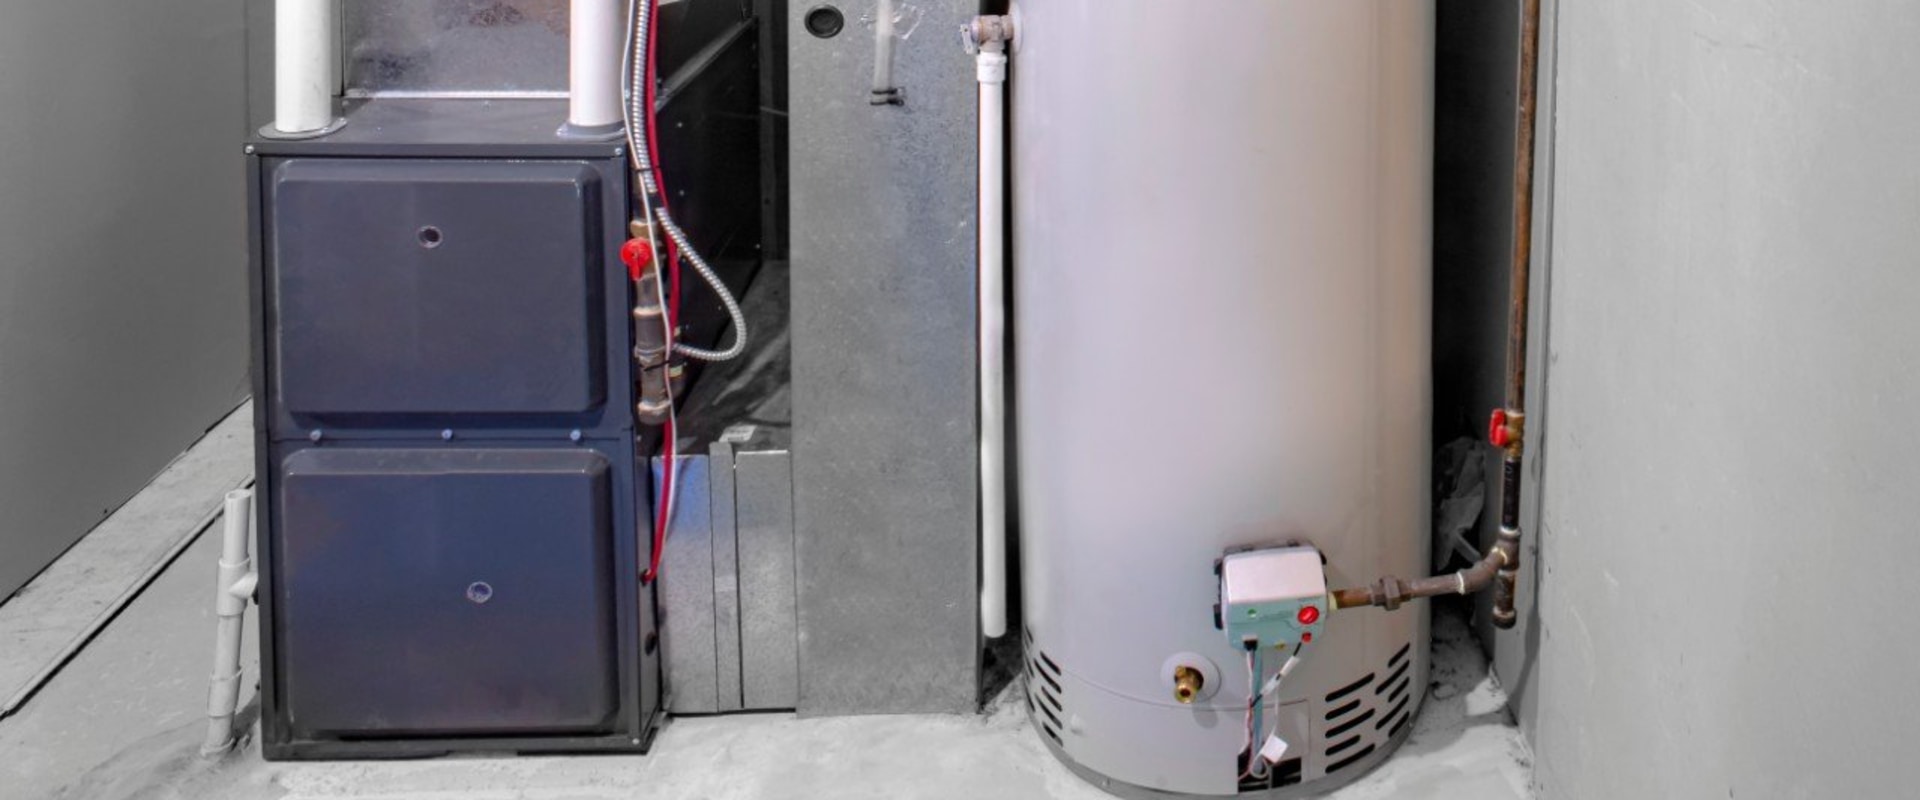 How to add water to a forced hot water heating system?